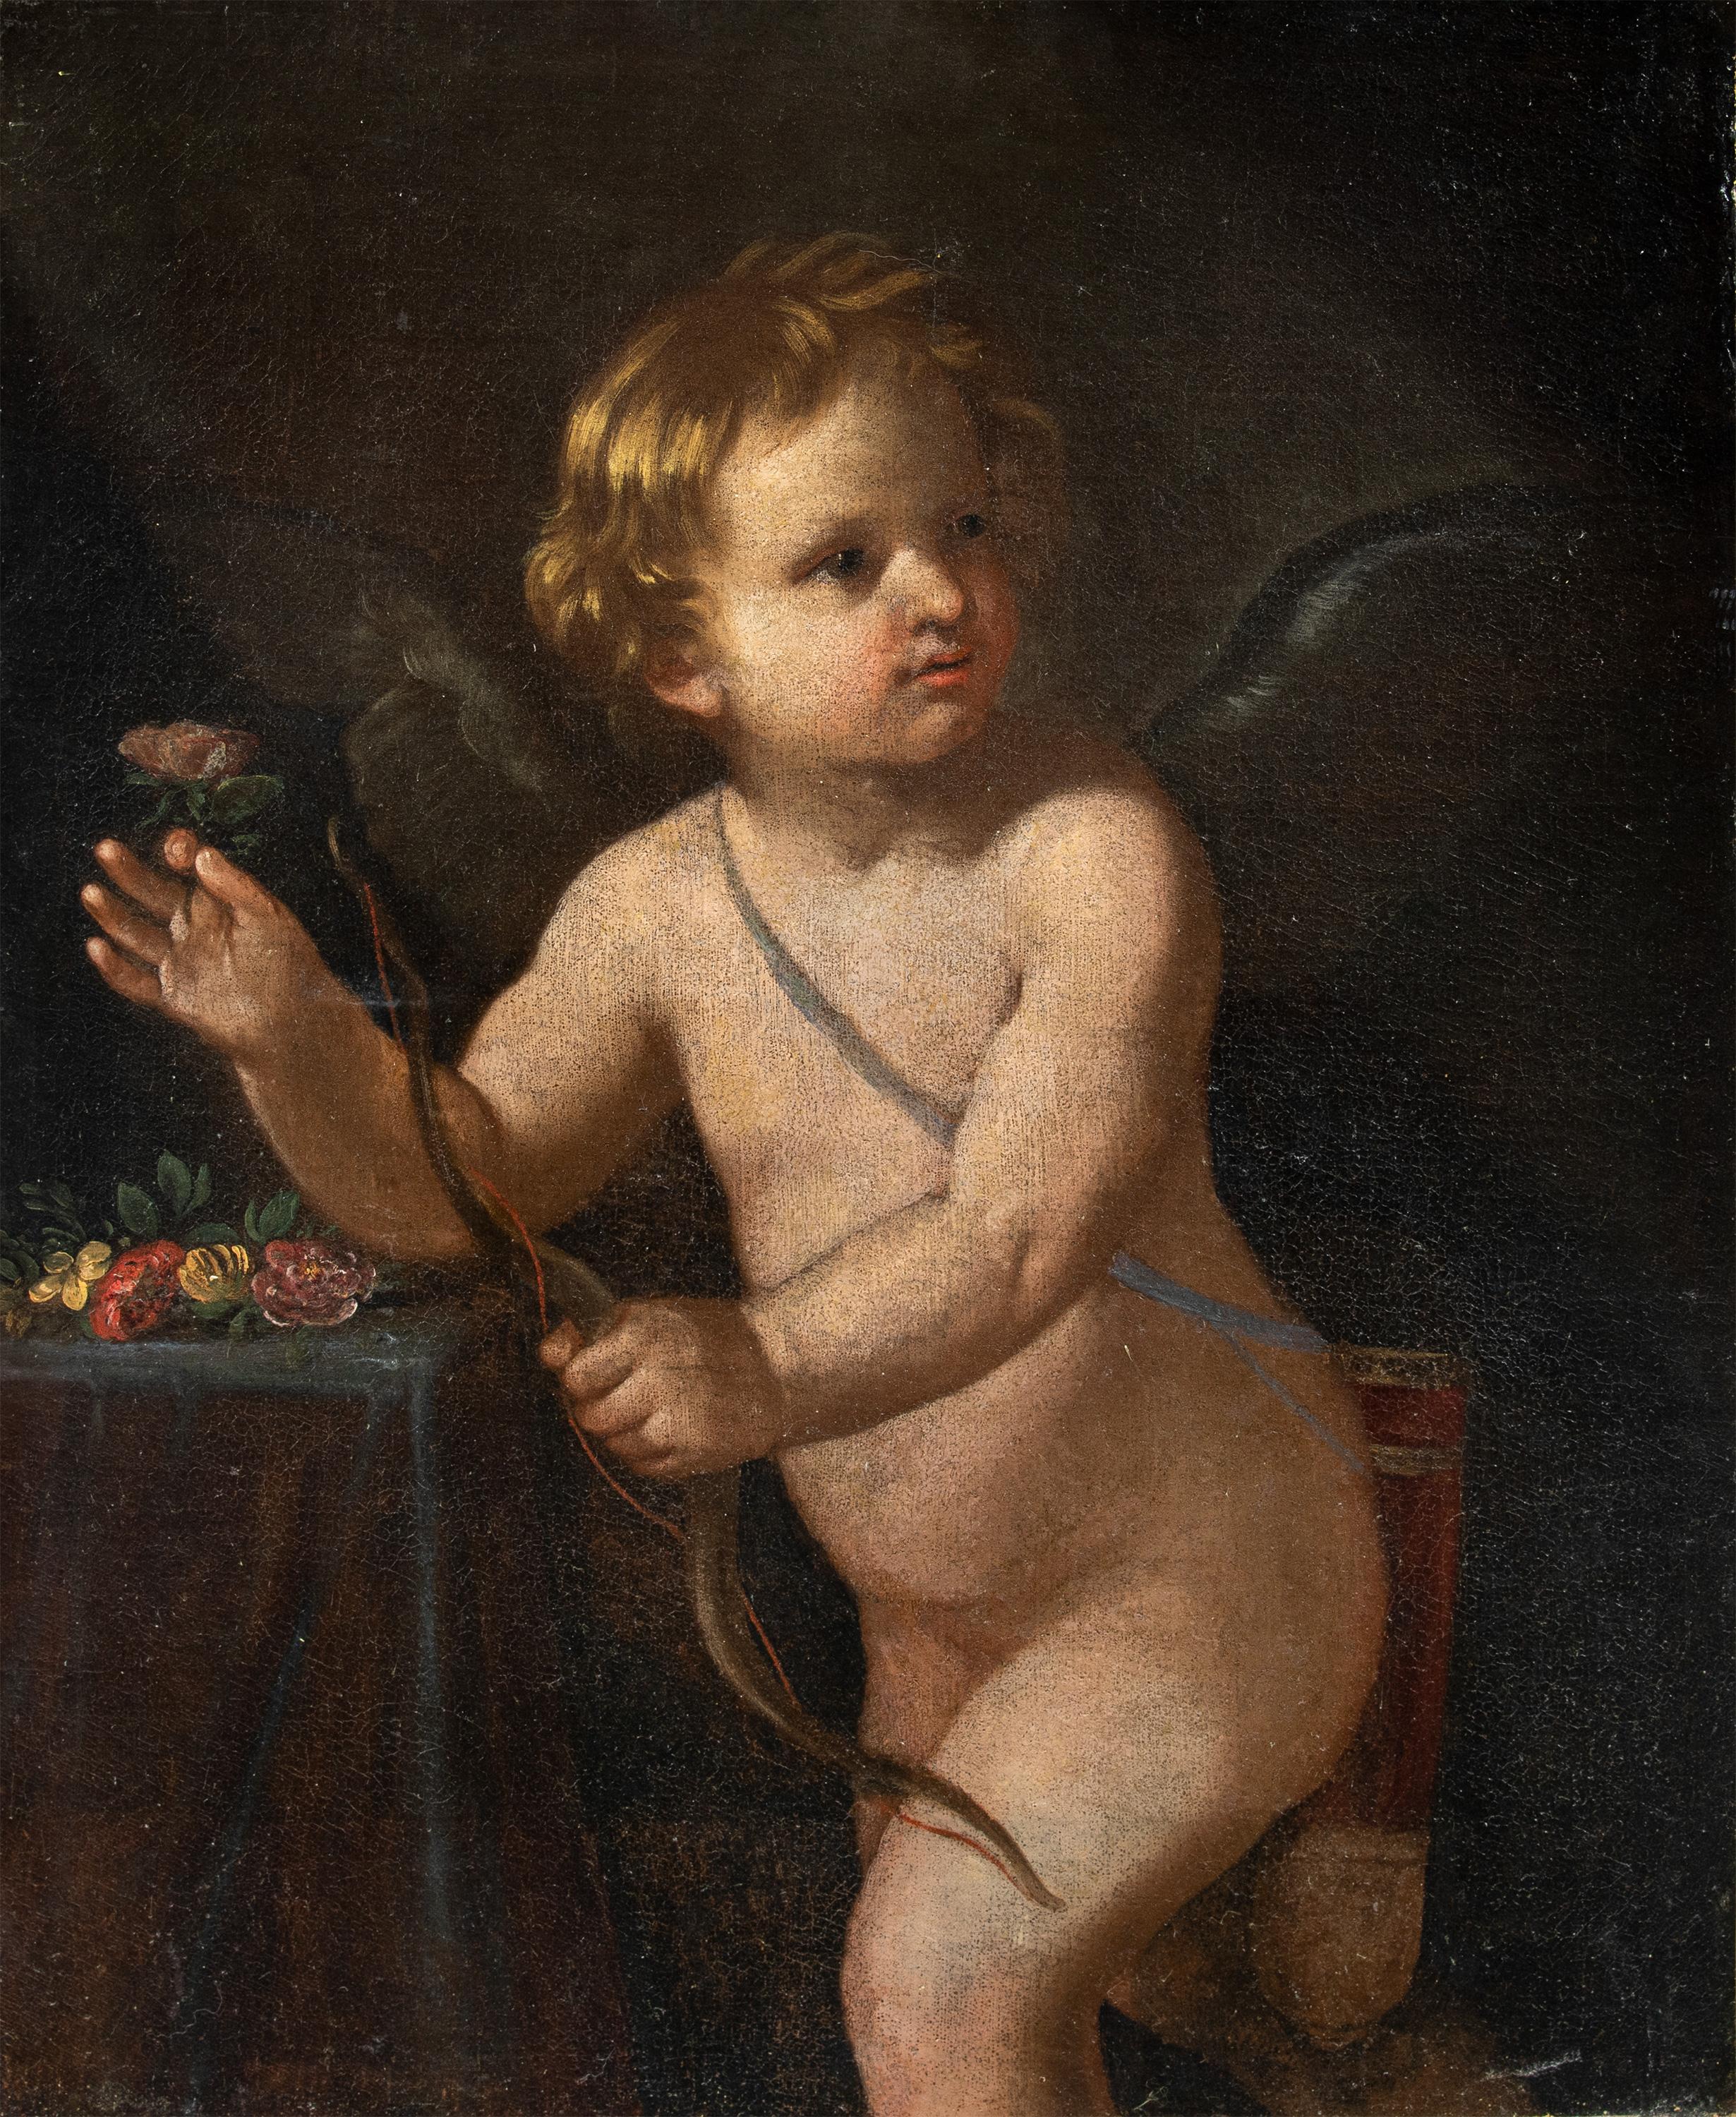 Circle of Guido Reni (Bologna 1575 - Bologna 1642) - Cupid.

73.5 x 60cm.

Antique oil painting on canvas, without frame.

- The painting is taken from an original by Guido Reni (Bologna 1575 - Bologna 1642).

Condition report: Painting subjected to